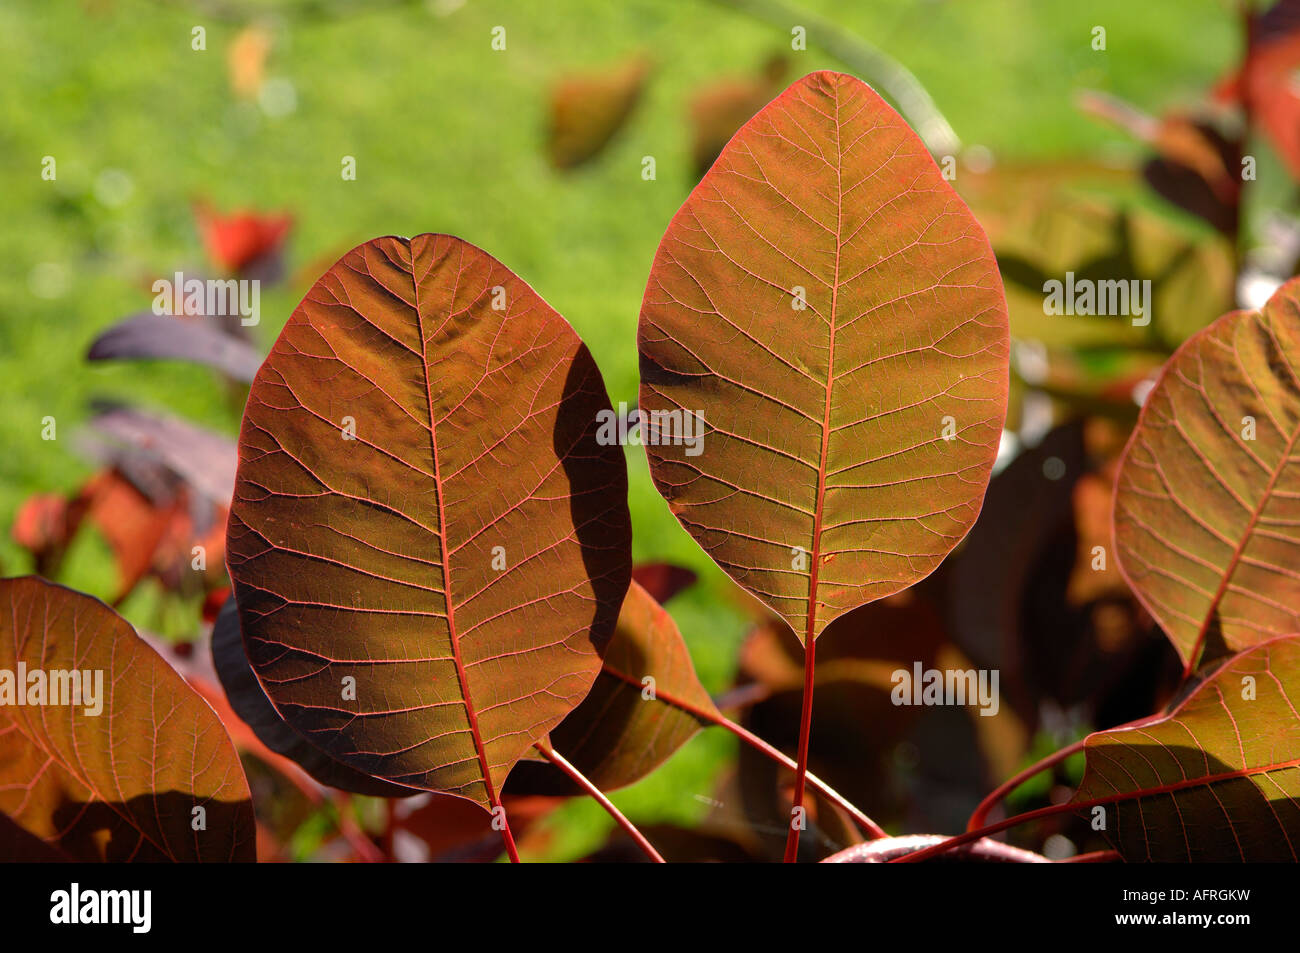 Light shining through the dark red leaves of a smoke tree Cotinus coggygria Stock Photo